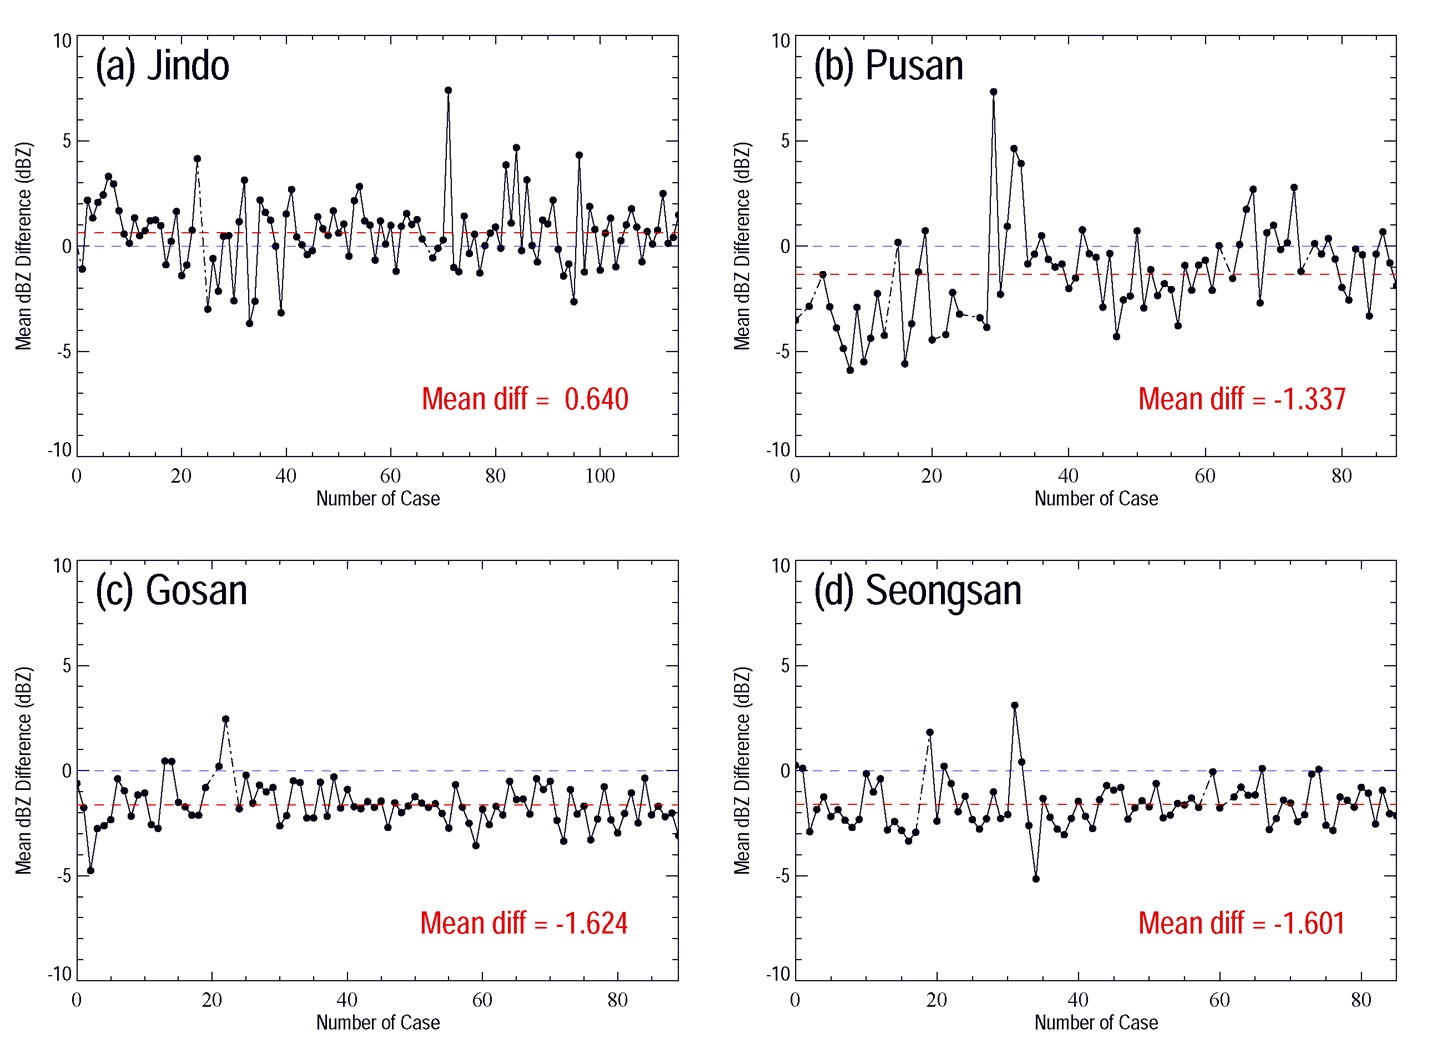 Fig. 4.1.6. Time-series of mean reflectivity differences between TRMM PR and GR at (a) Jindo (RJNI), (b) Pusan (RPSN), (c) Gosan (RGSN), and (d) Seongsan (RSSP) from August 2006 to May 2008.